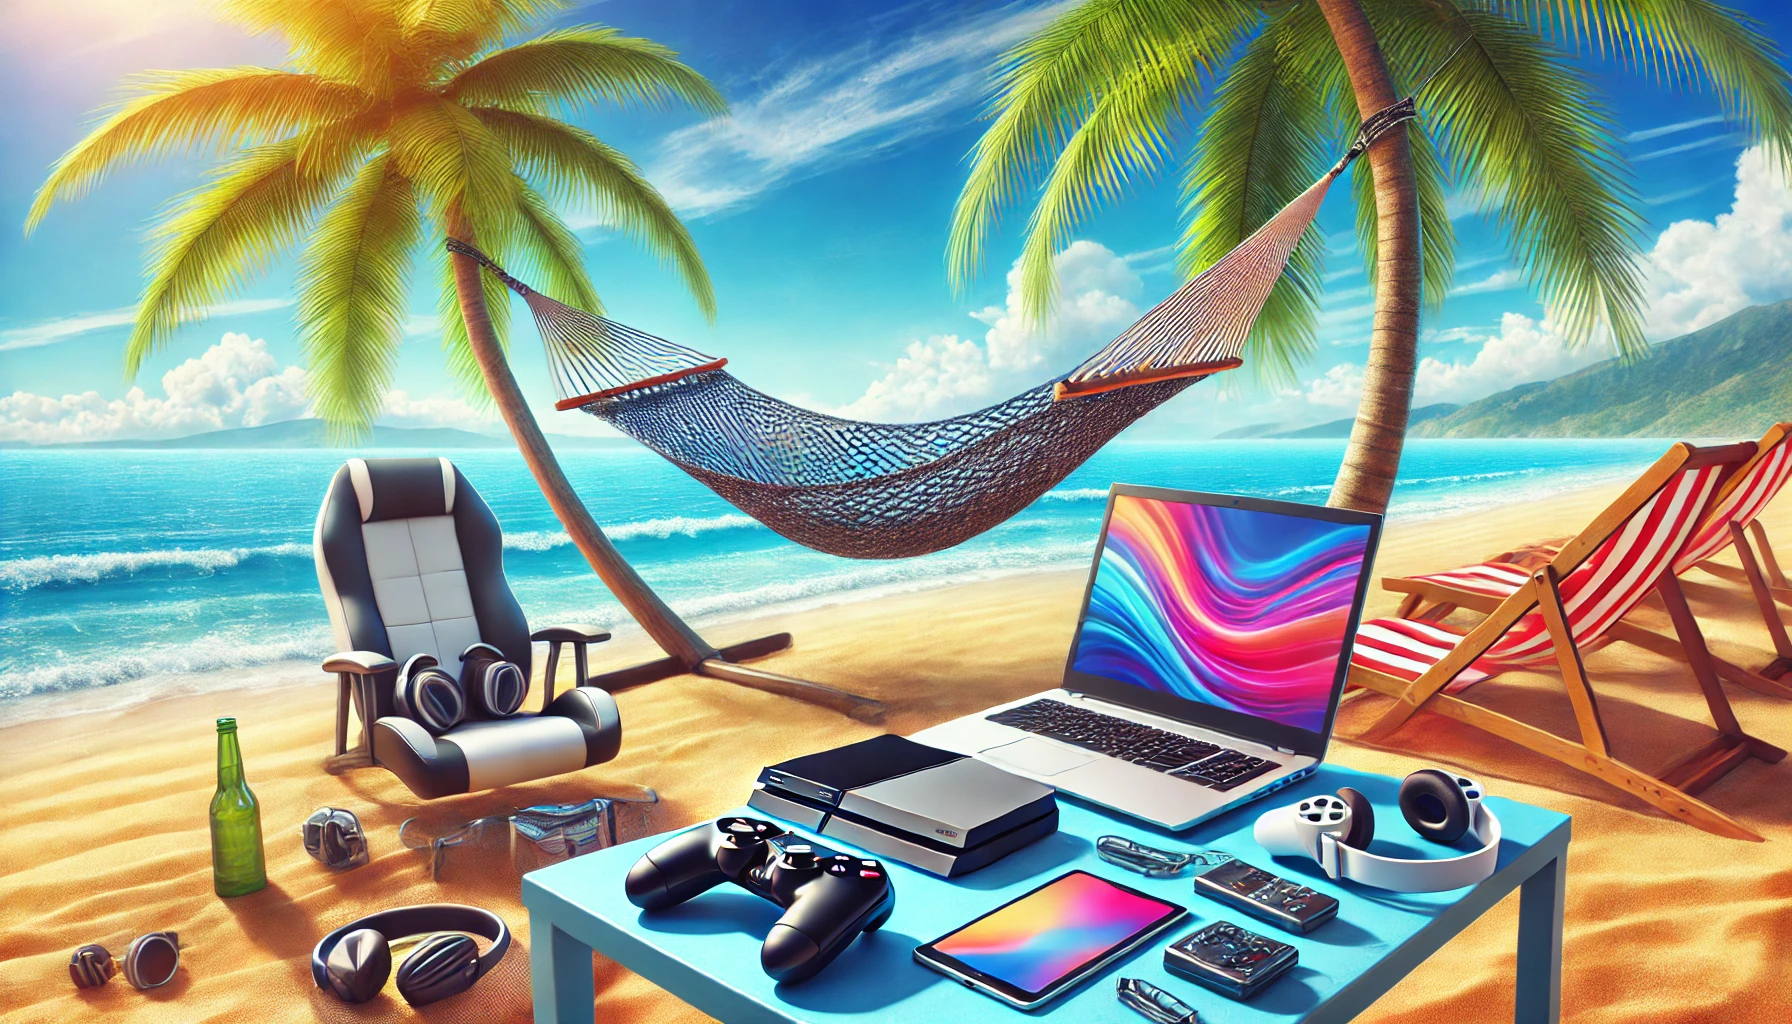 Techcravers Summer Update: Taking a Break but Staying Connected